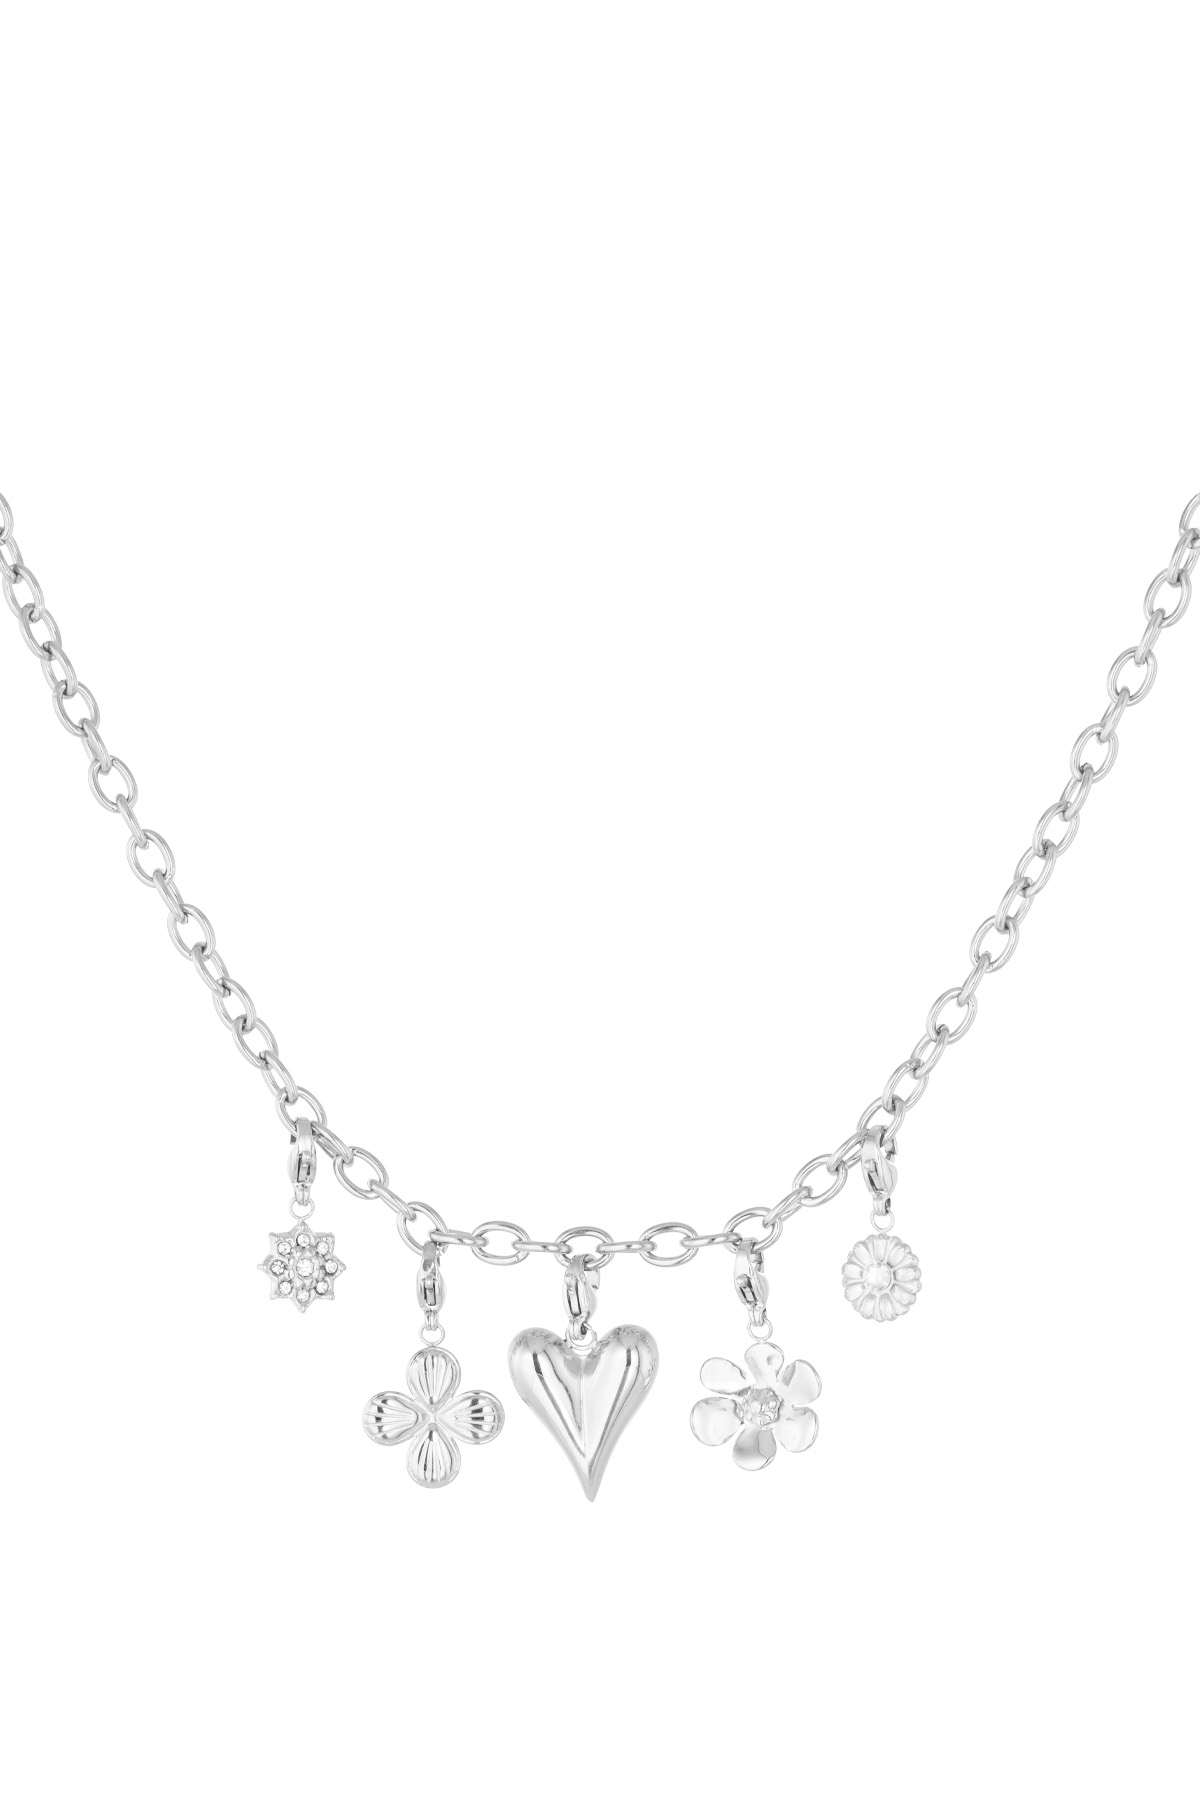 Charm necklace charming daily - silver h5 